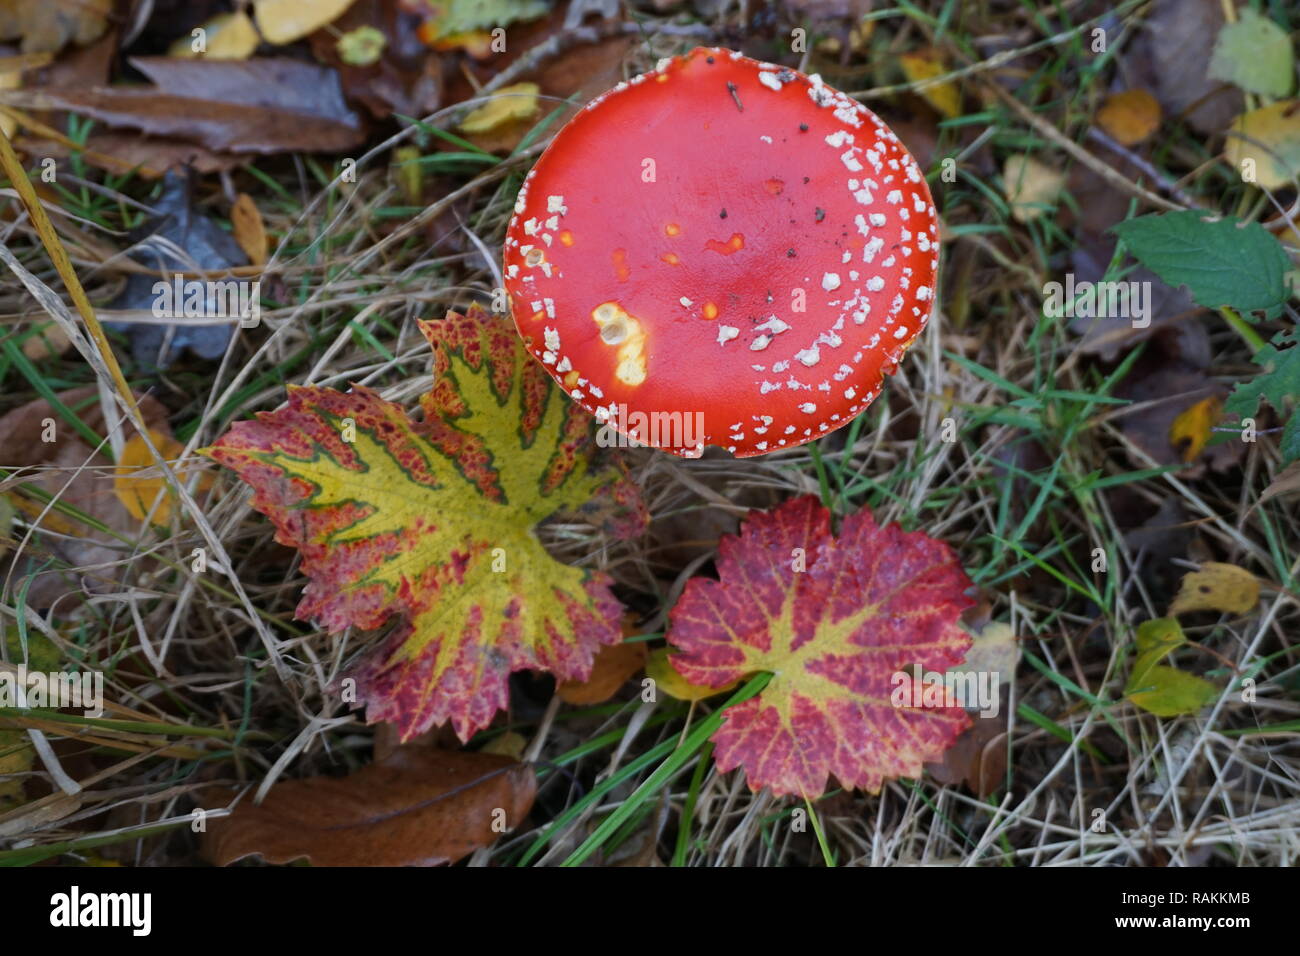 Wild red beautiful poisonous mushroom with colorful vine leaves on the forest ground Stock Photo